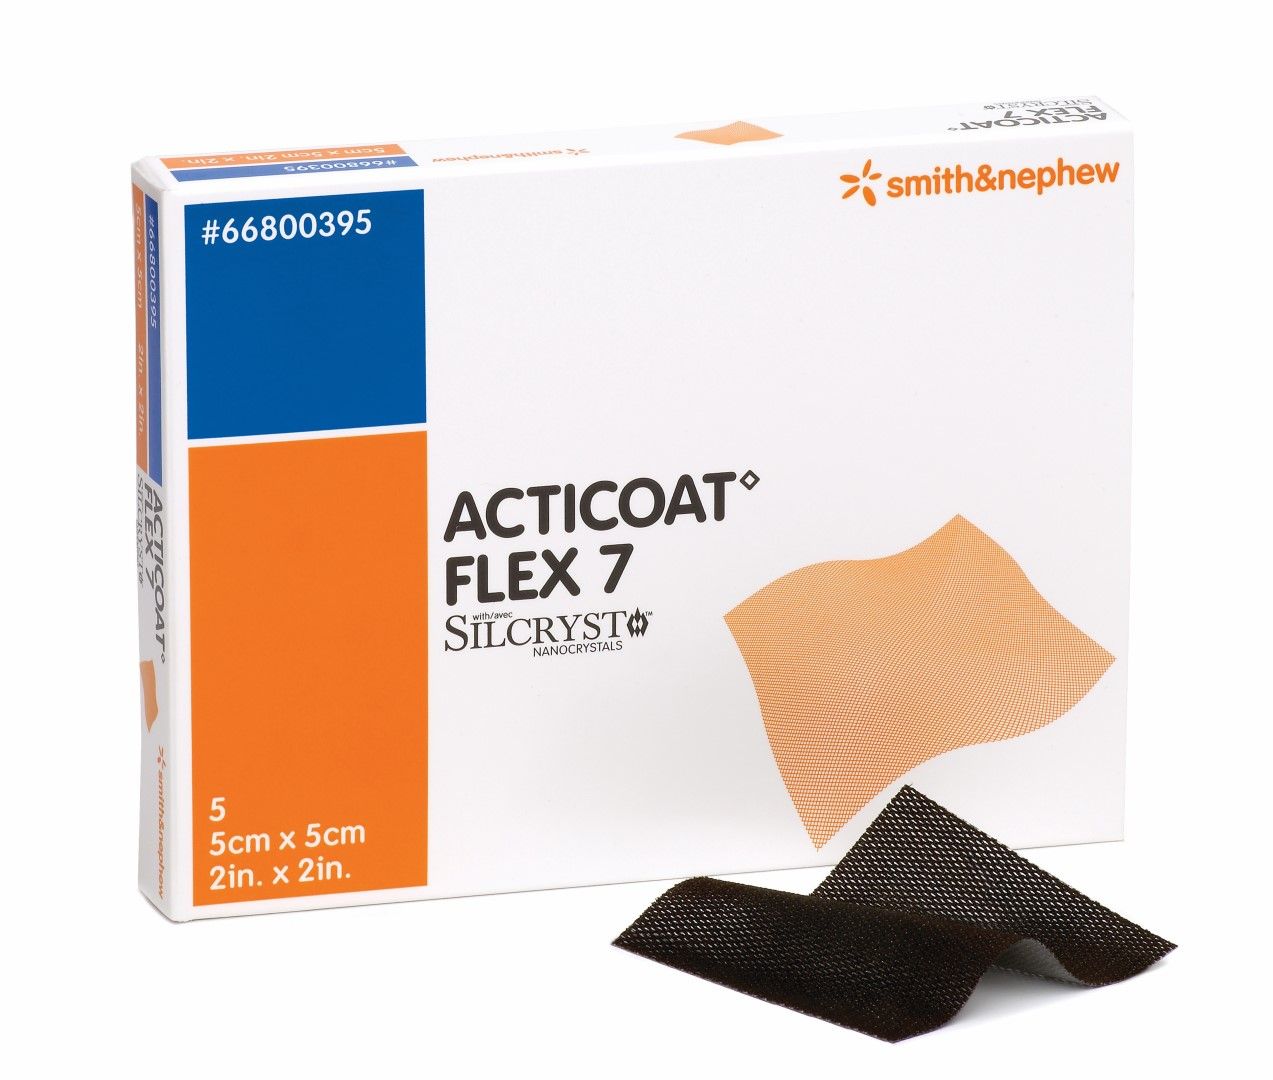 ACTICOAT FLEX 7 ANTIMICROBIAL BARRIER DRESSING photo